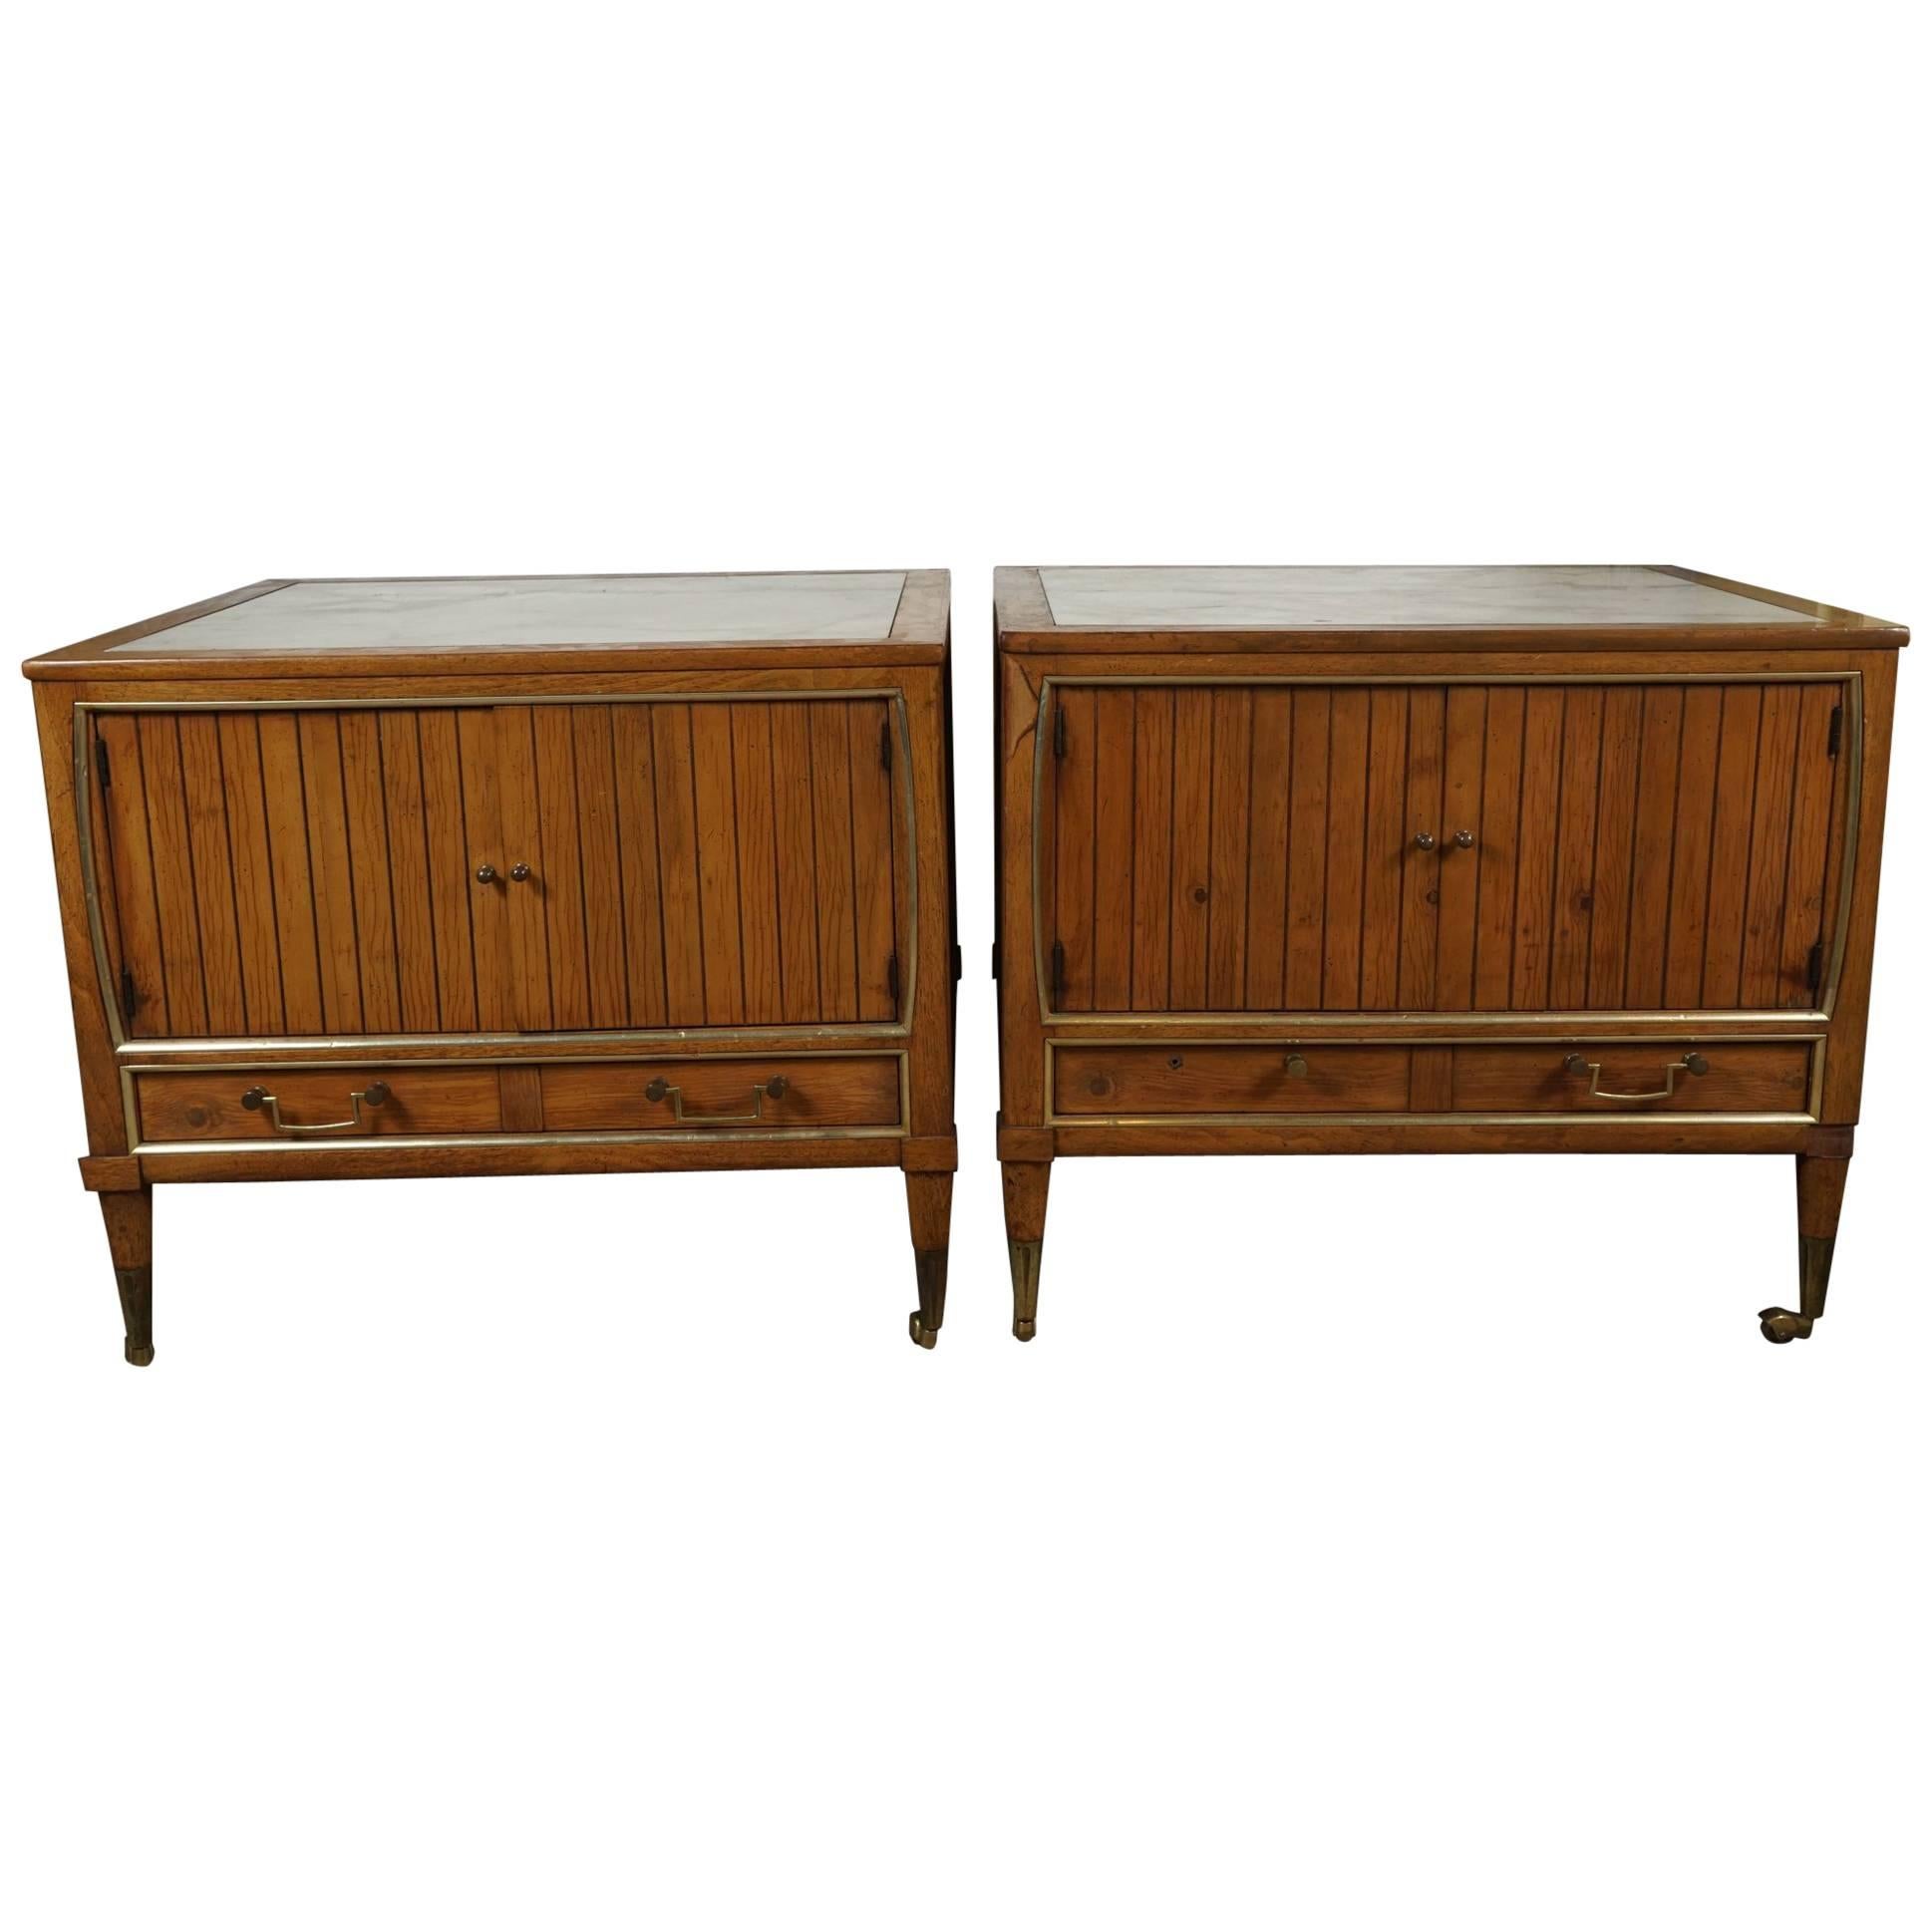 Pair of End Tables with a Maple Finish and Marble Tops For Sale